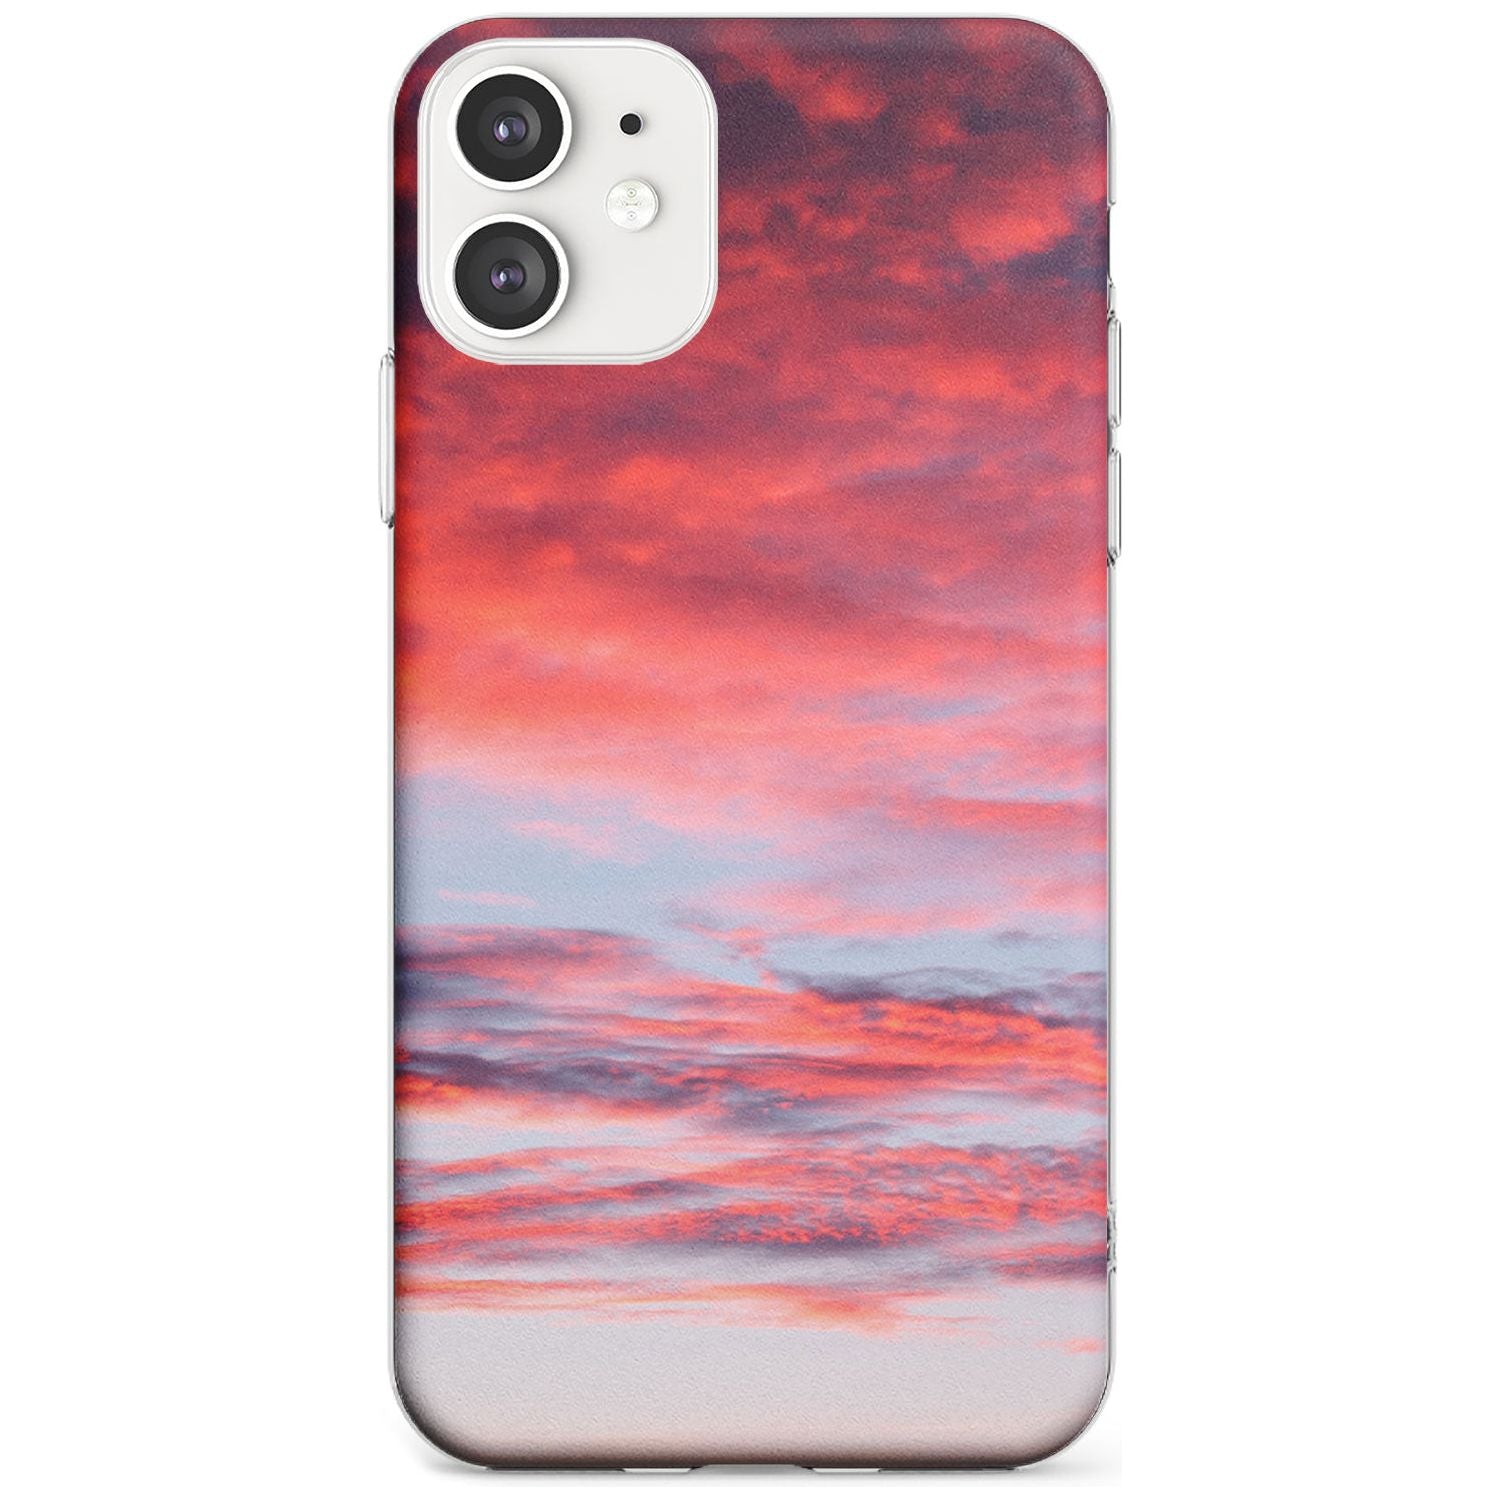 Pink Cloudy Sunset Photograph Slim TPU Phone Case for iPhone 11